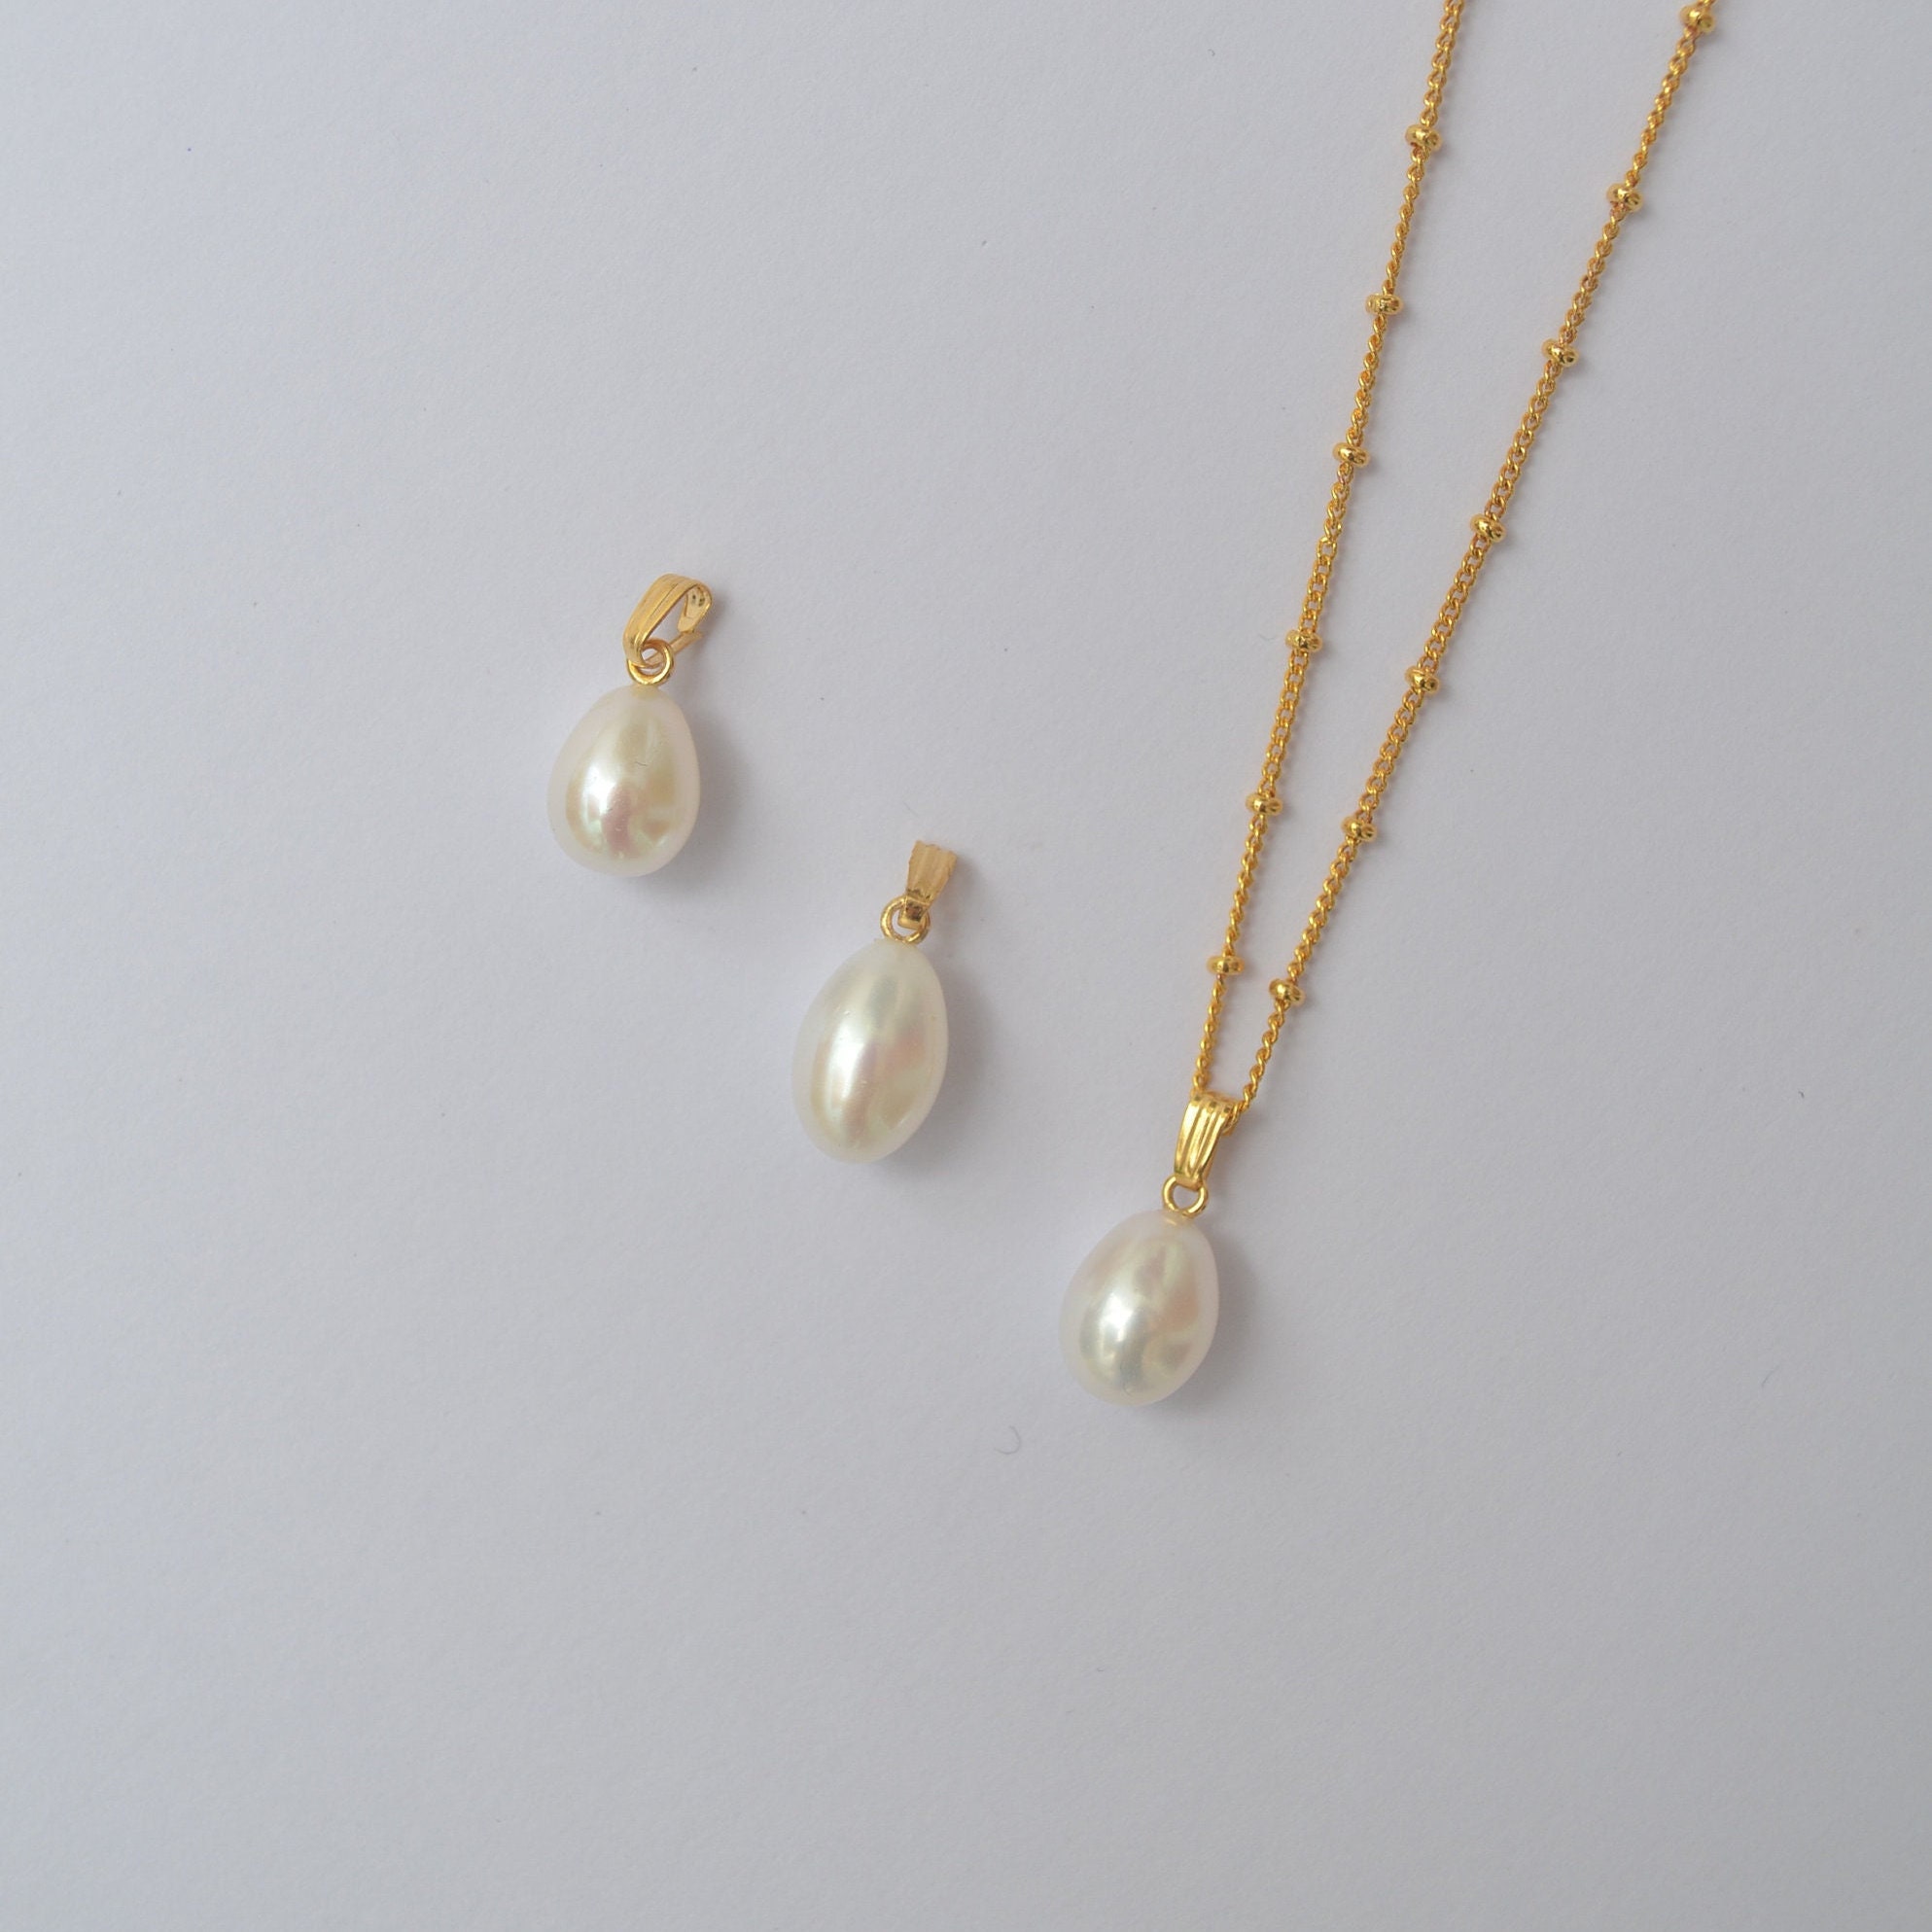 Gold Pearl Pendant Necklace for Women and Girls, Large Gold Pearl Pendant  Necklace for Women, Ladies Gold Necklace With a White Faux Pearl 